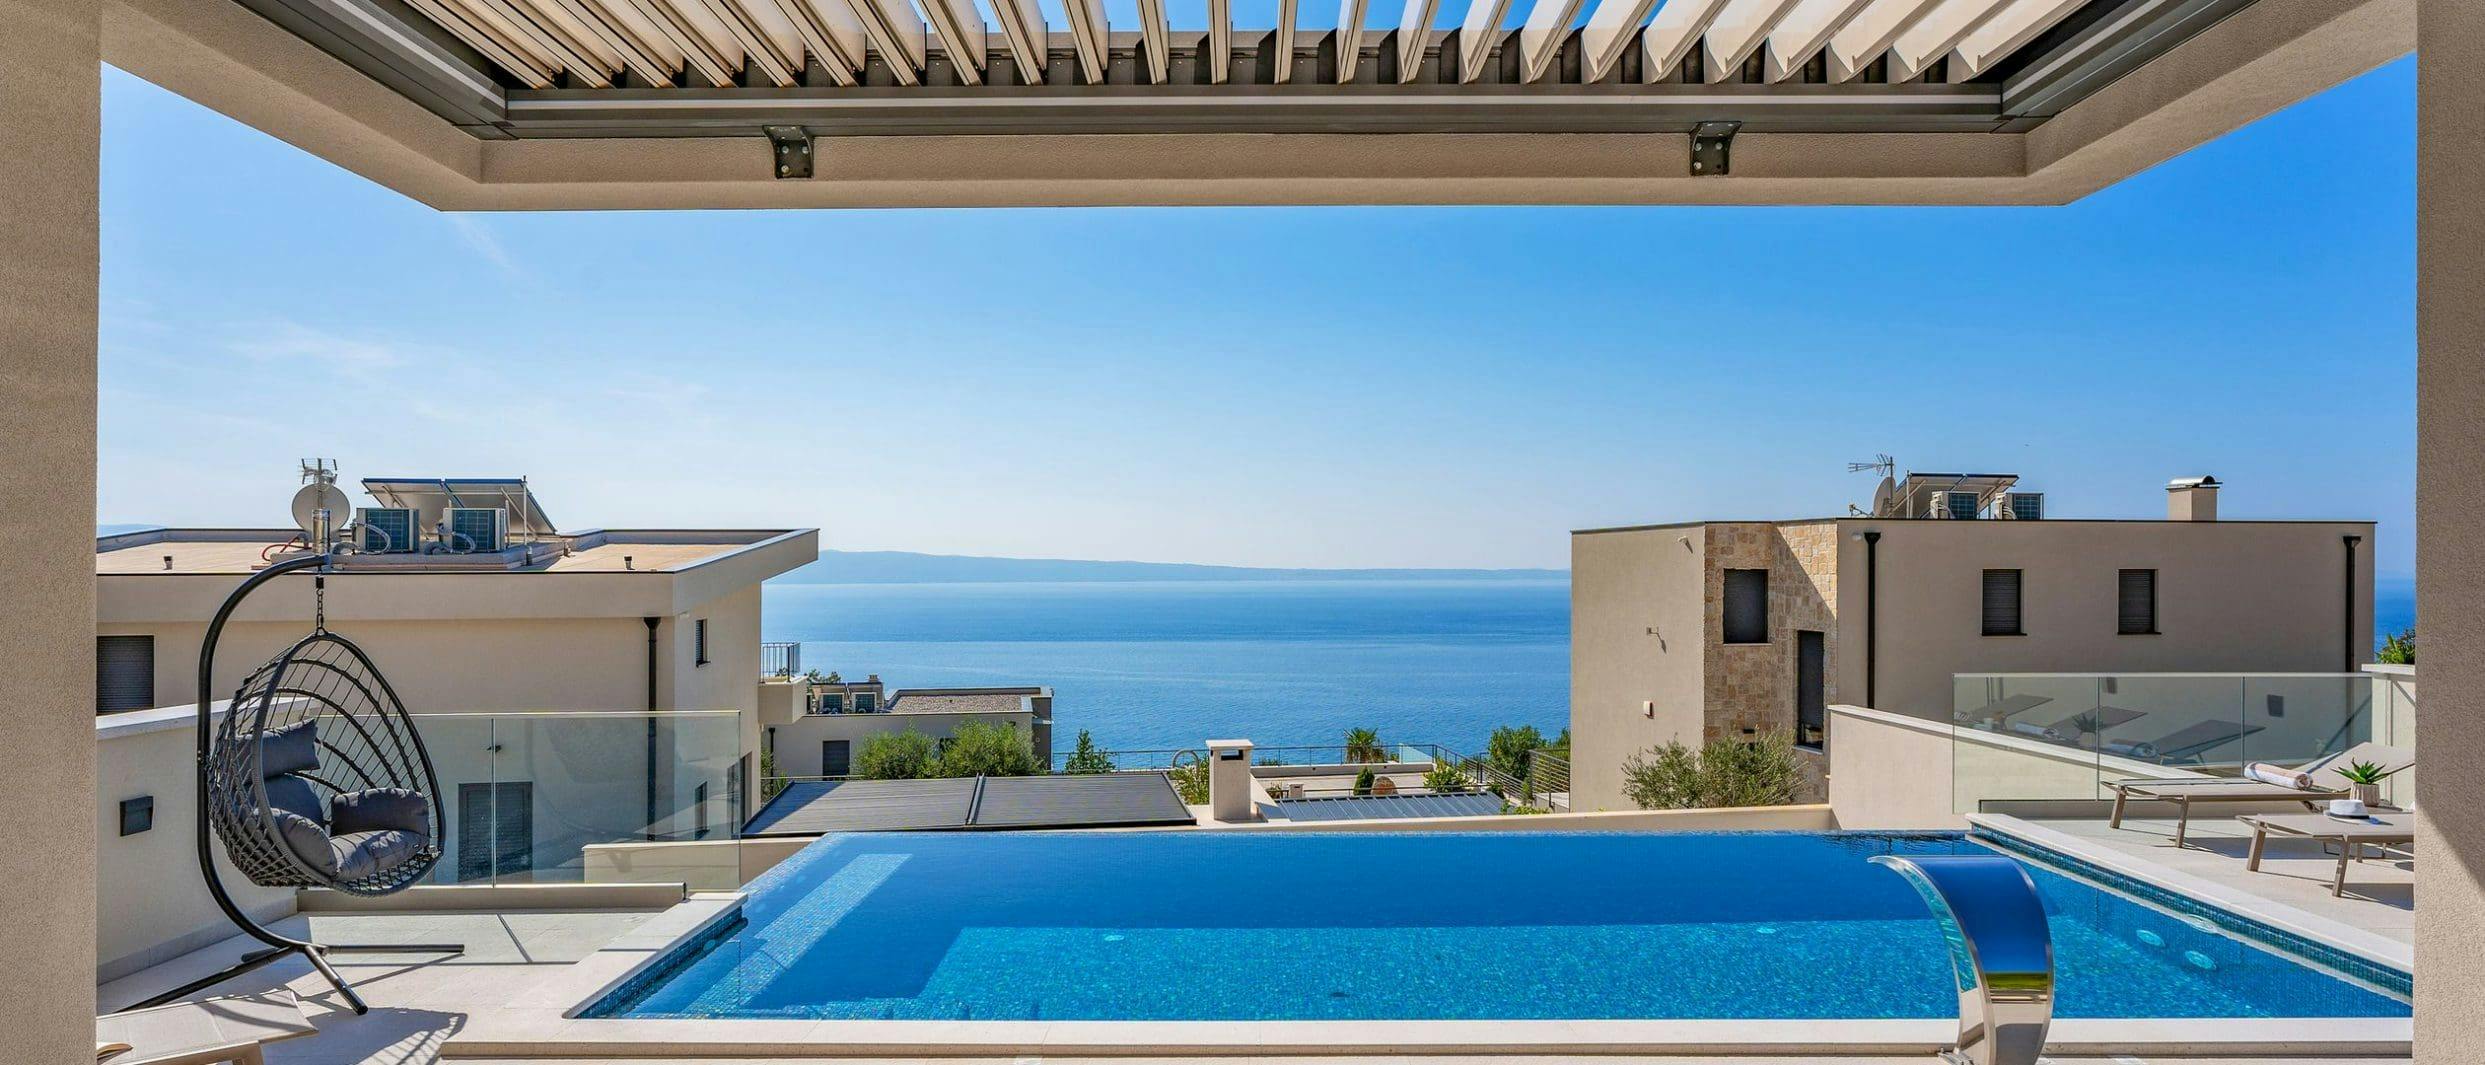 Newly built villa with pool and sea view